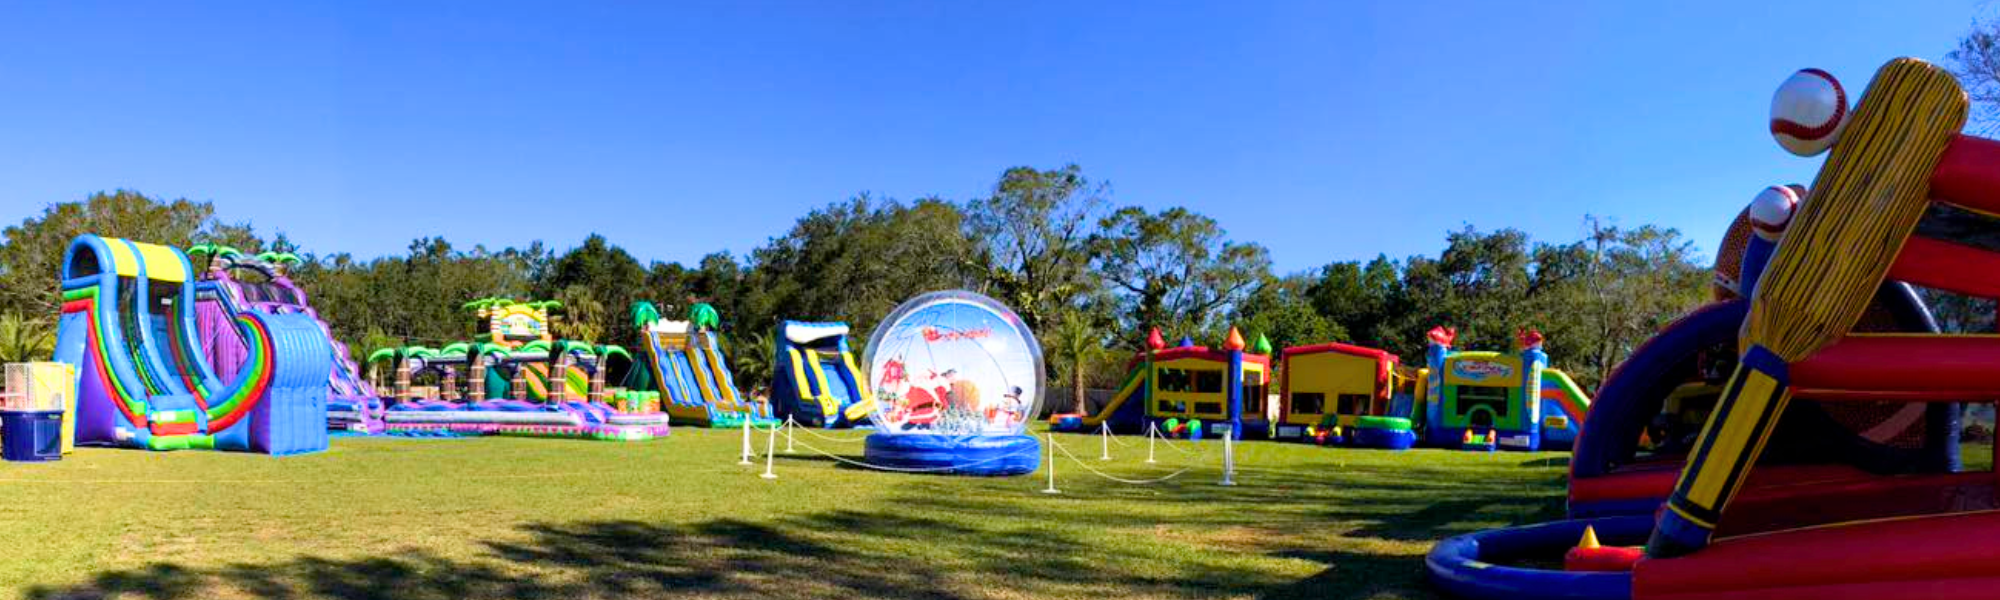 10 Essential Tips for Hosting an Awesome School Fall Festival with Jumptastic - Jumptastic